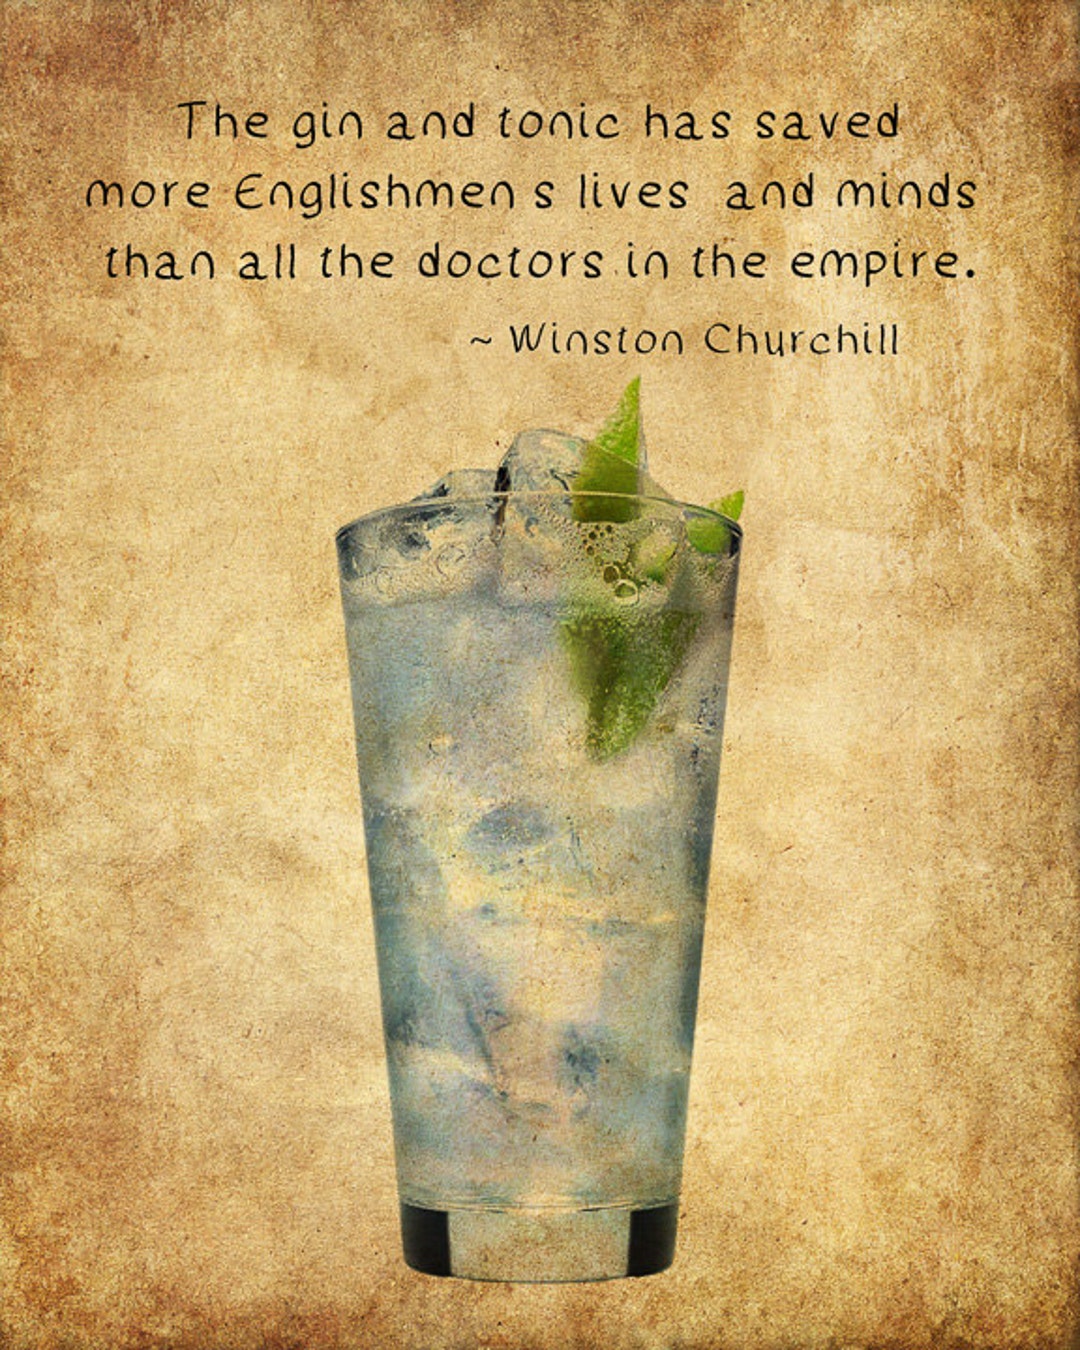 Art Poster Gin Quote Art Art - Tonic Churchill Decor and Etsy vi422 Bar Wall Gin Poster Cocktail Home Print